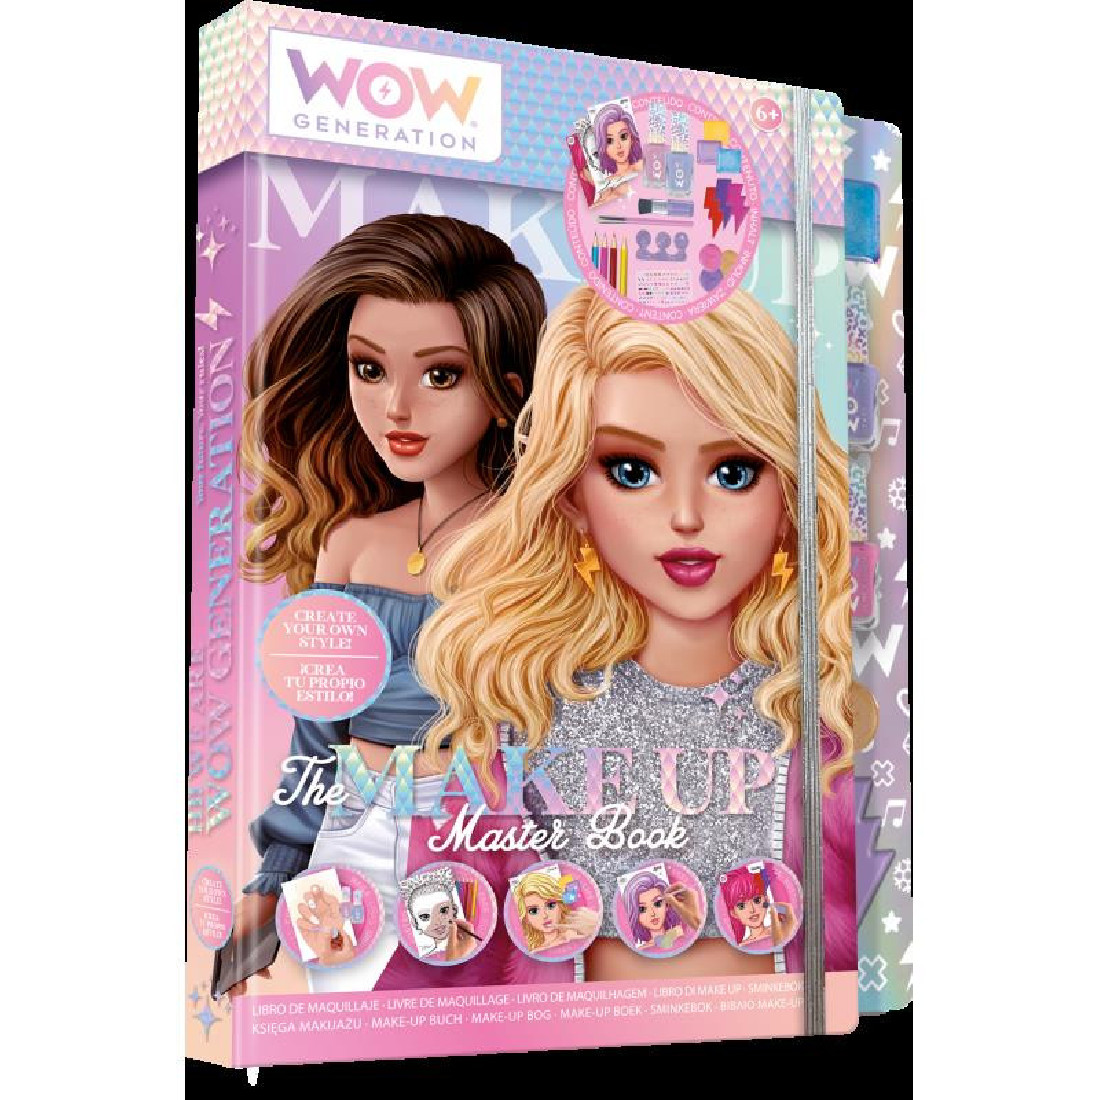 The MAKE UP Master Book 87769 Wow Generation